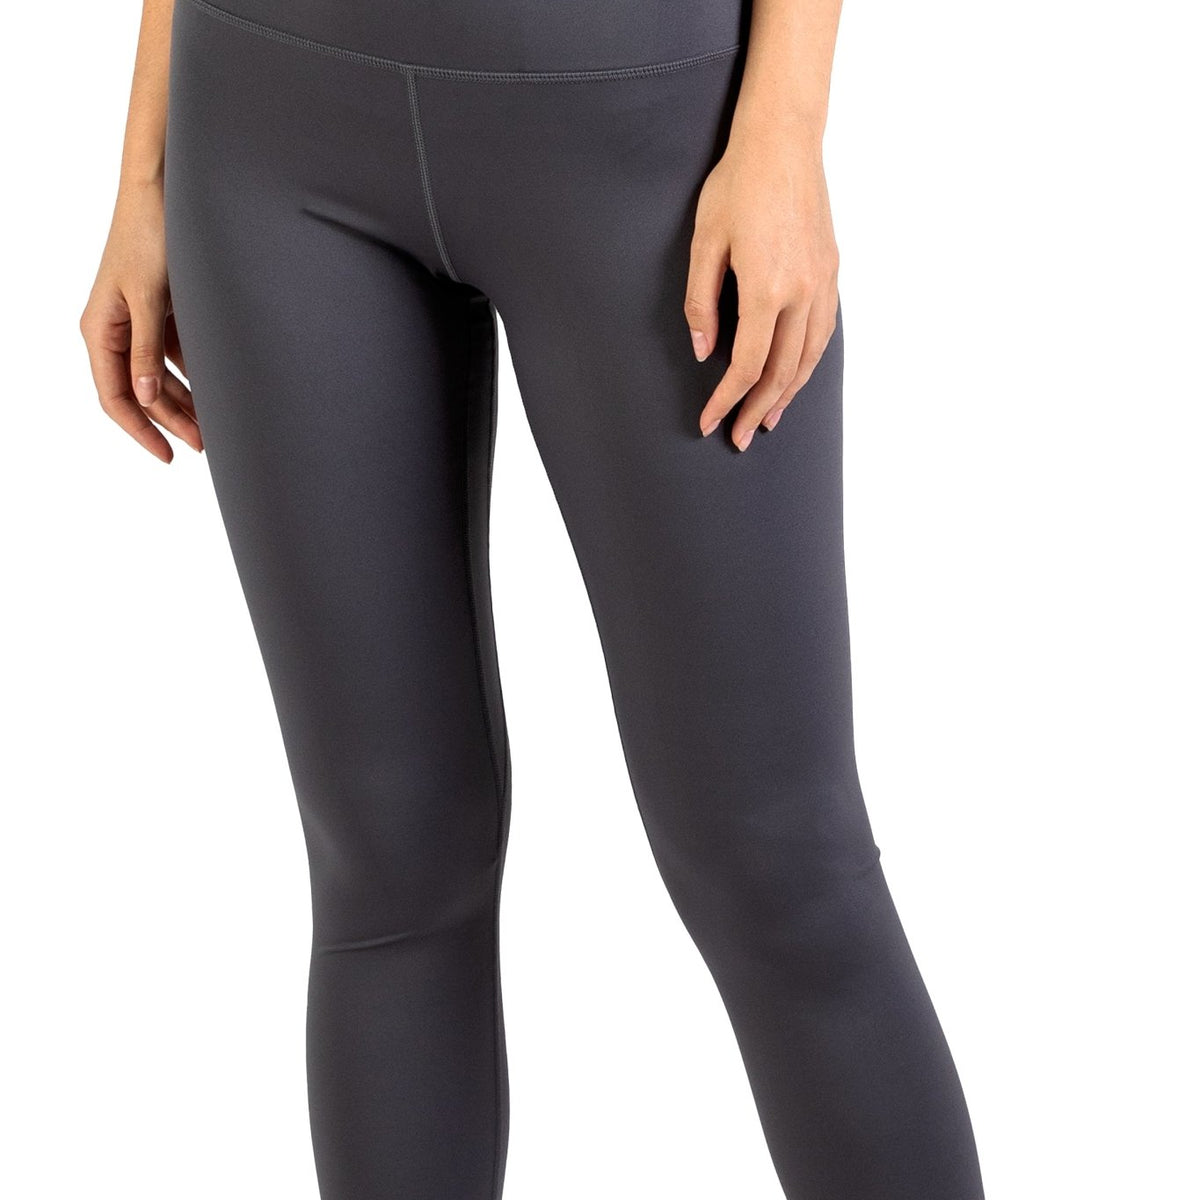 BUTTERY SMOOTH LEGGINGS - CLOUD GREY